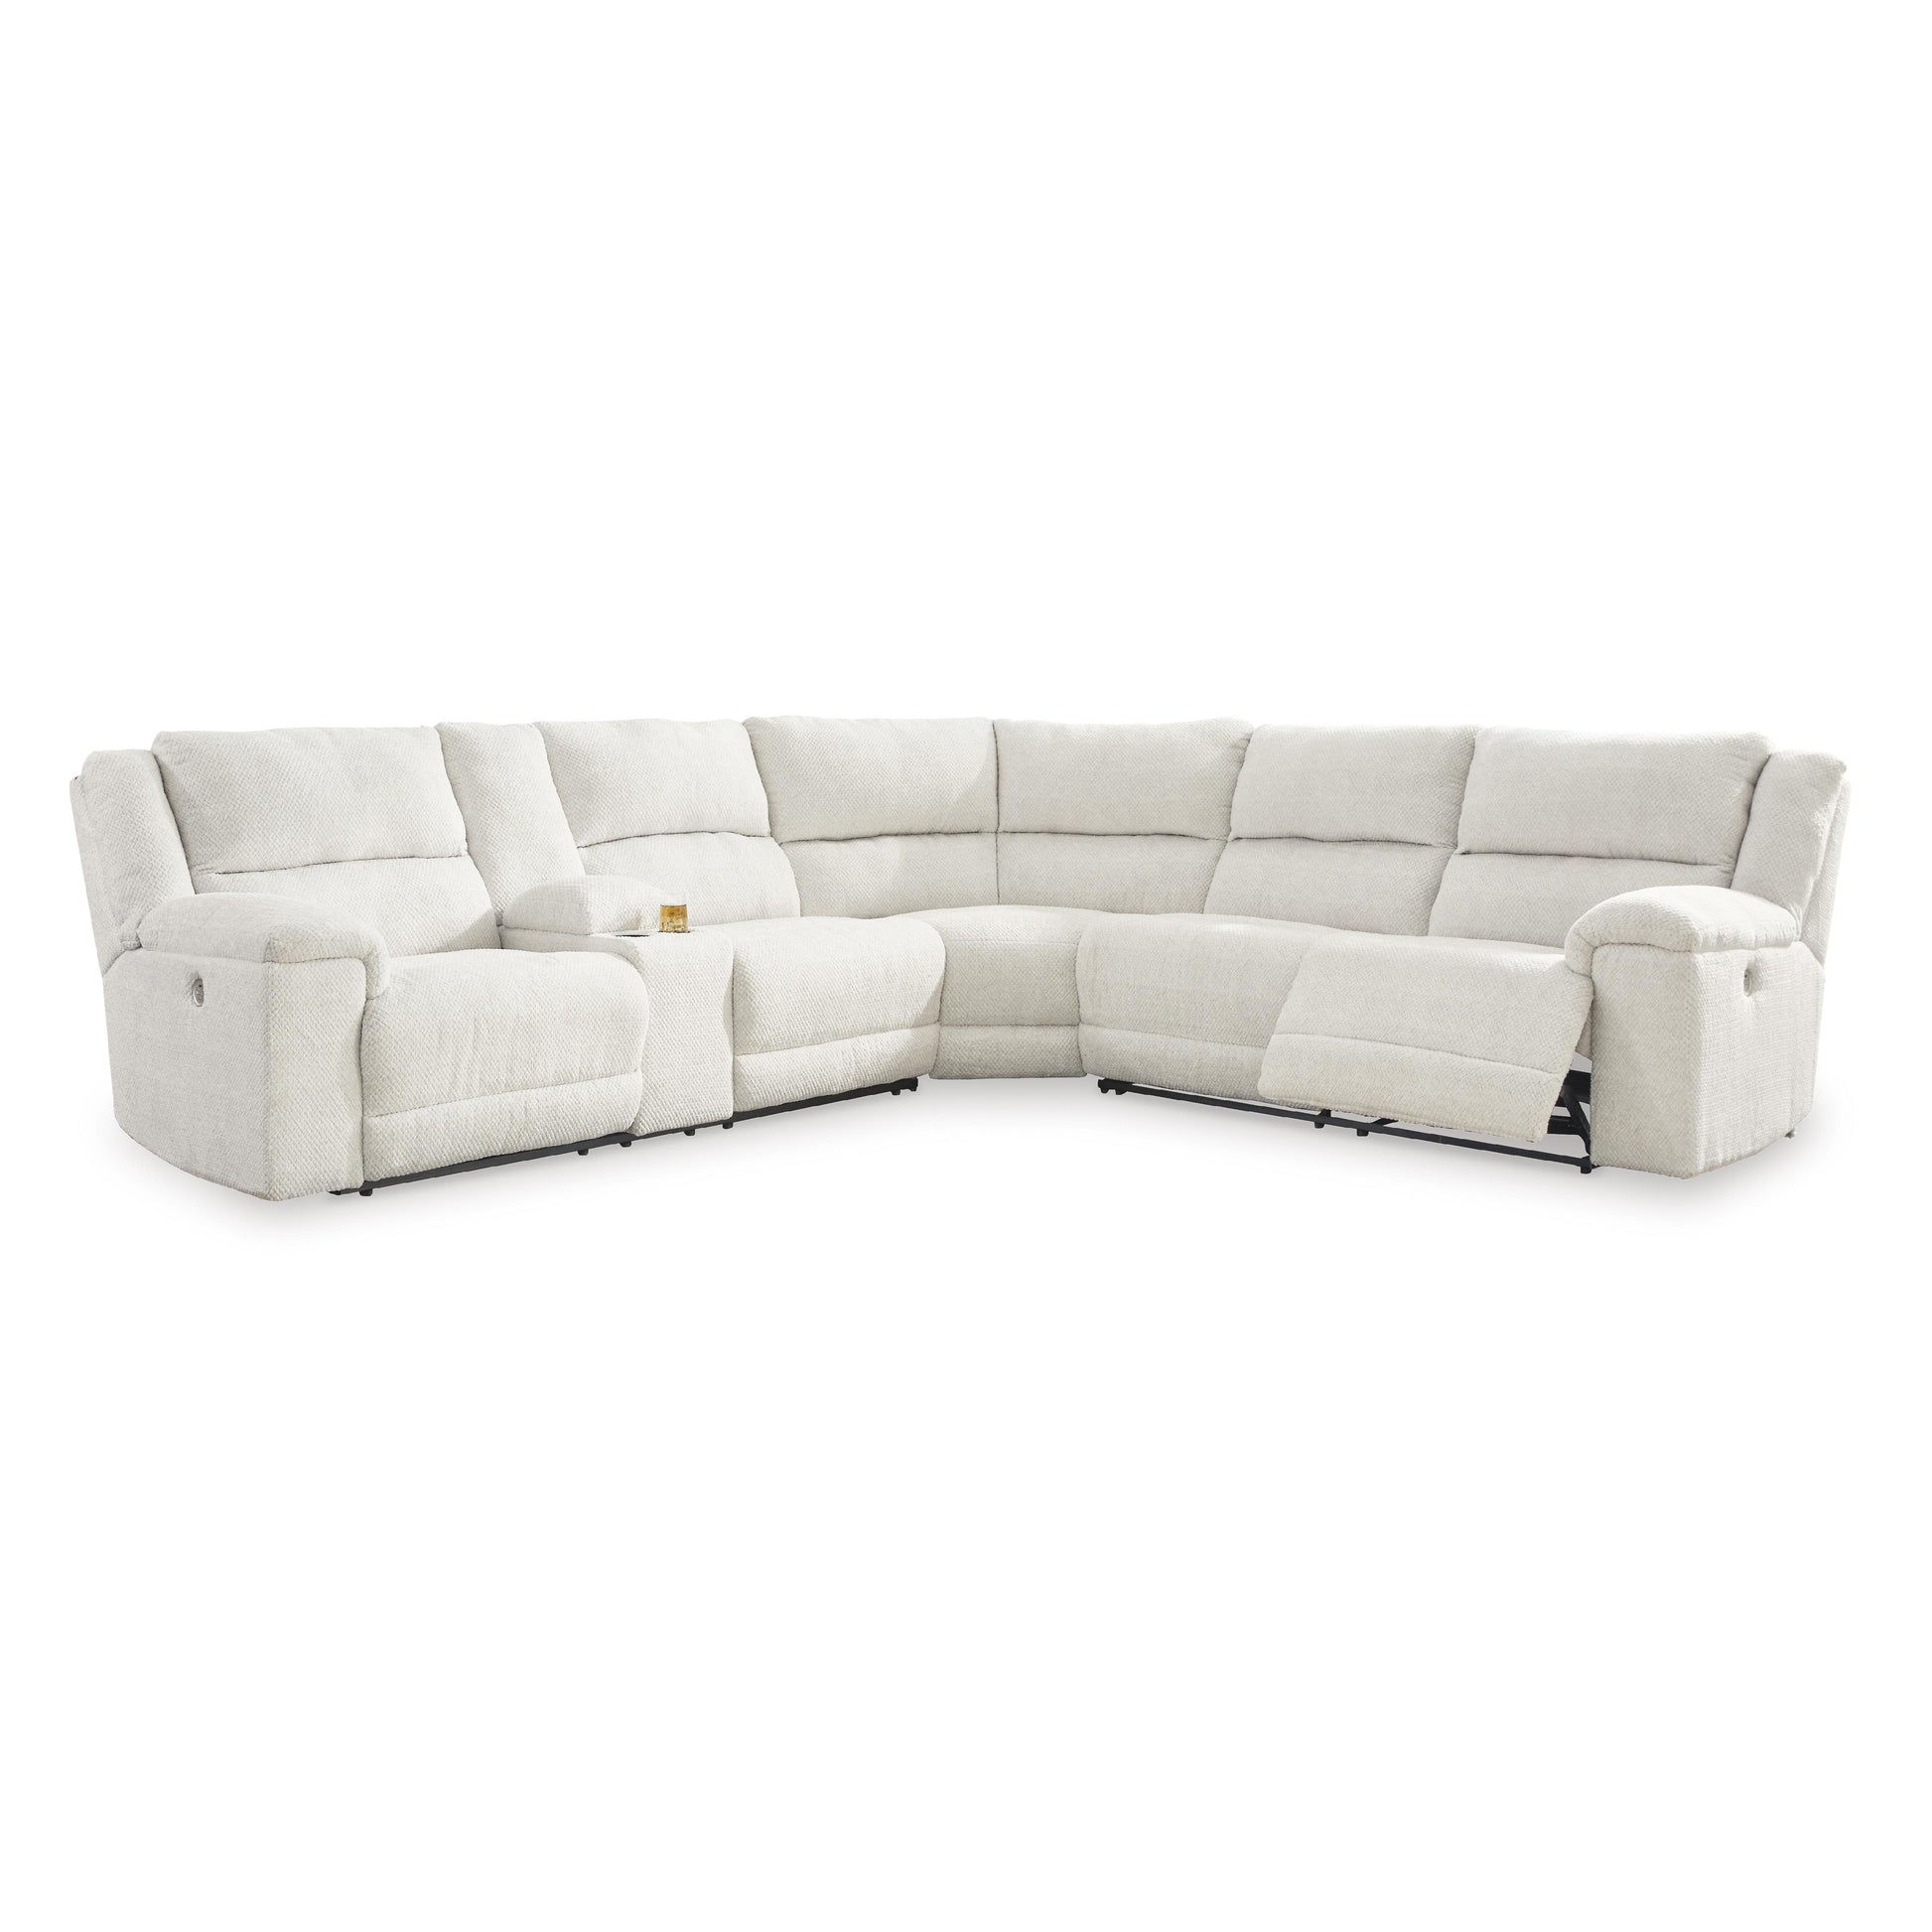 Signature Design by Ashley Keensburg Power Reclining Fabric 3 pc Sectional 6180701/6180777/6180775 IMAGE 1